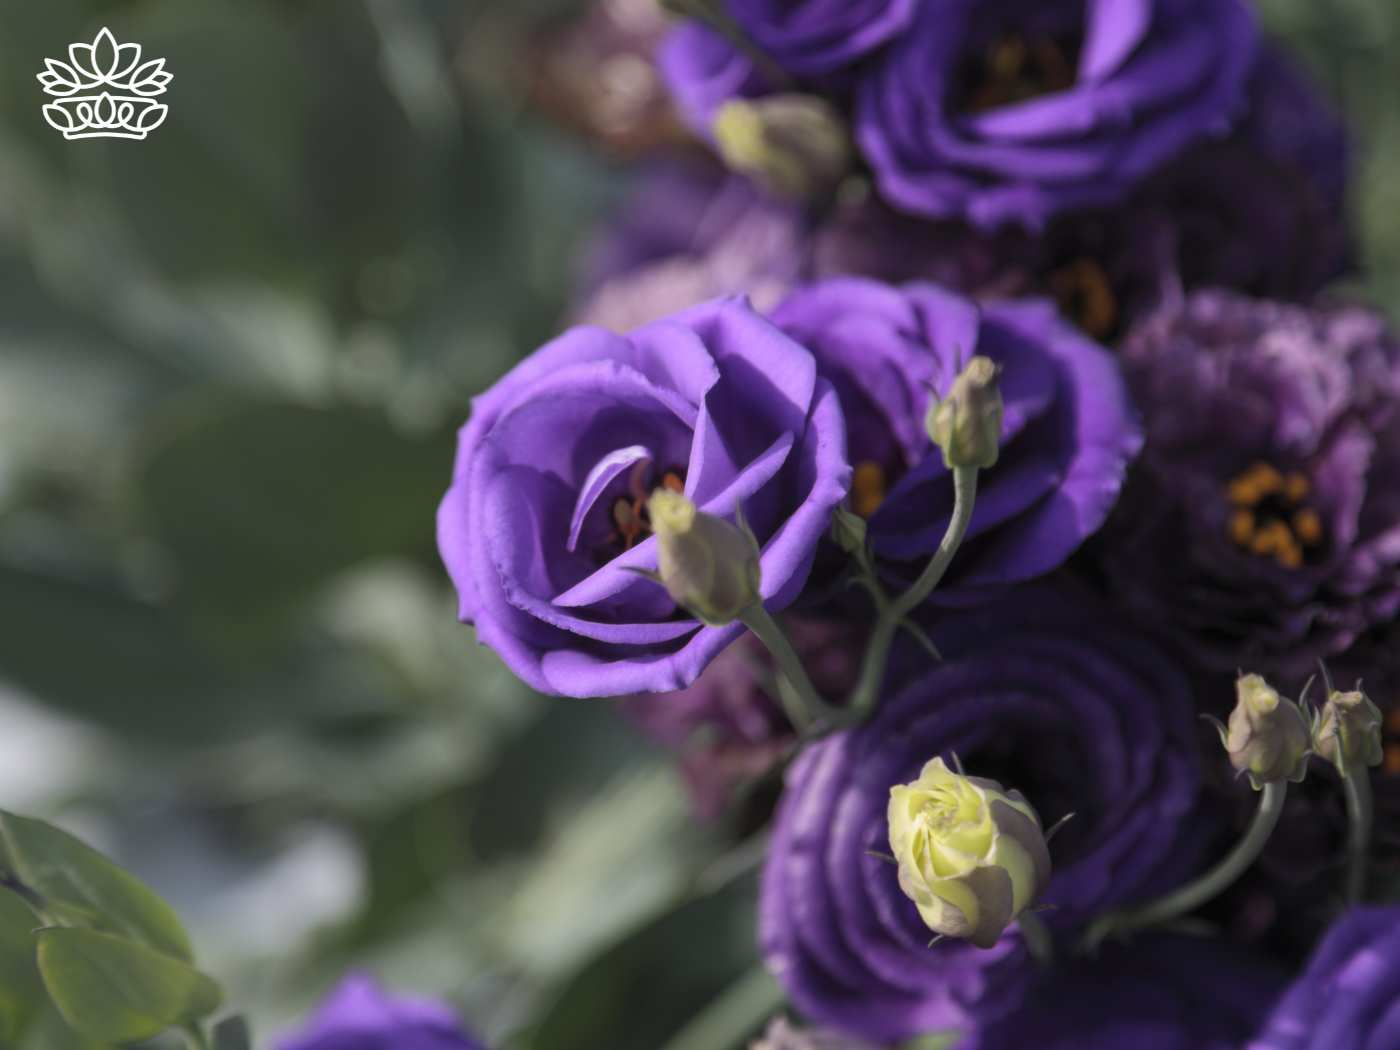 Vivid purple lisianthus flowers in full bloom, showcasing their intricate petals and deep colors, ideal as cut flowers and flowering plants. These lisianthus are perfect for those looking to plant seeds outdoors, enhancing any garden. Part of the Lisianthus Collection at Fabulous Flowers and Gifts.